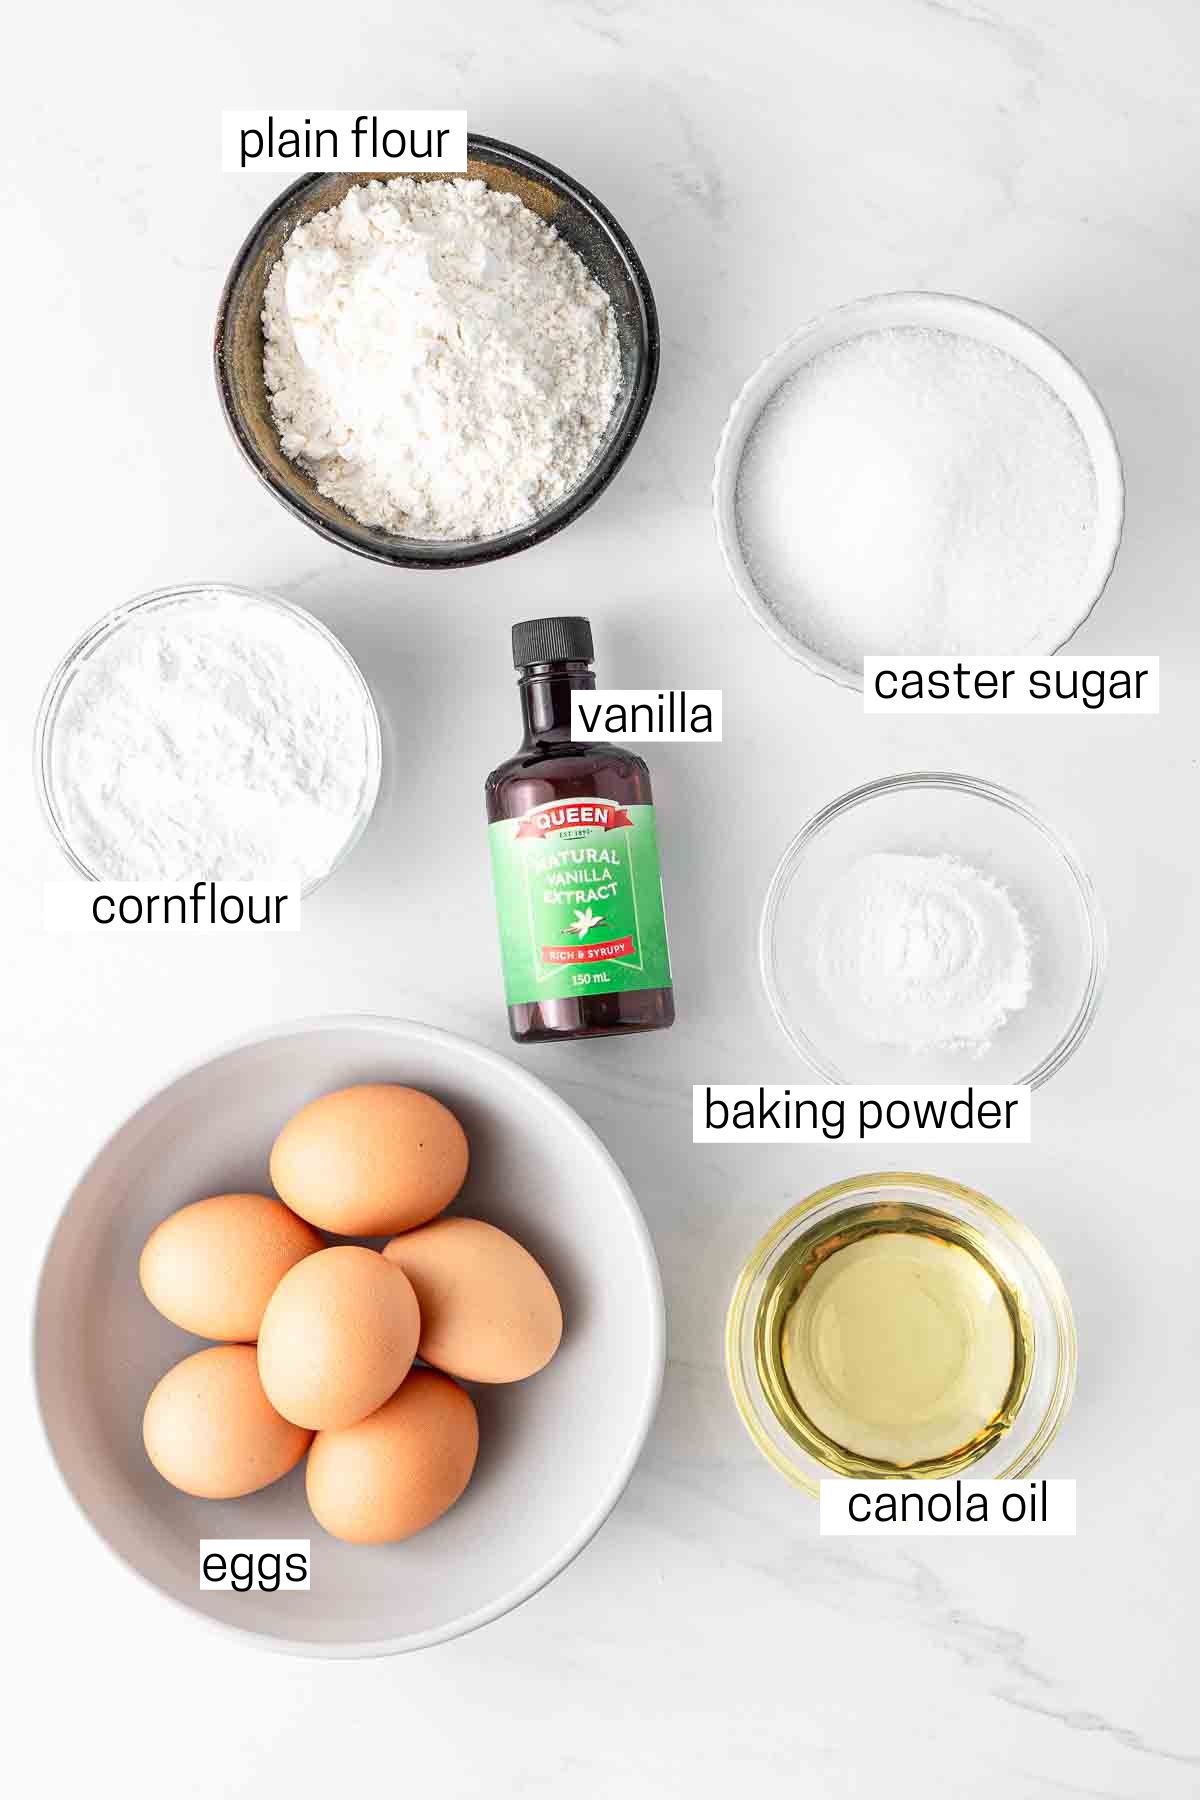 All ingredients needed for the sponge cake laid out in bowls.